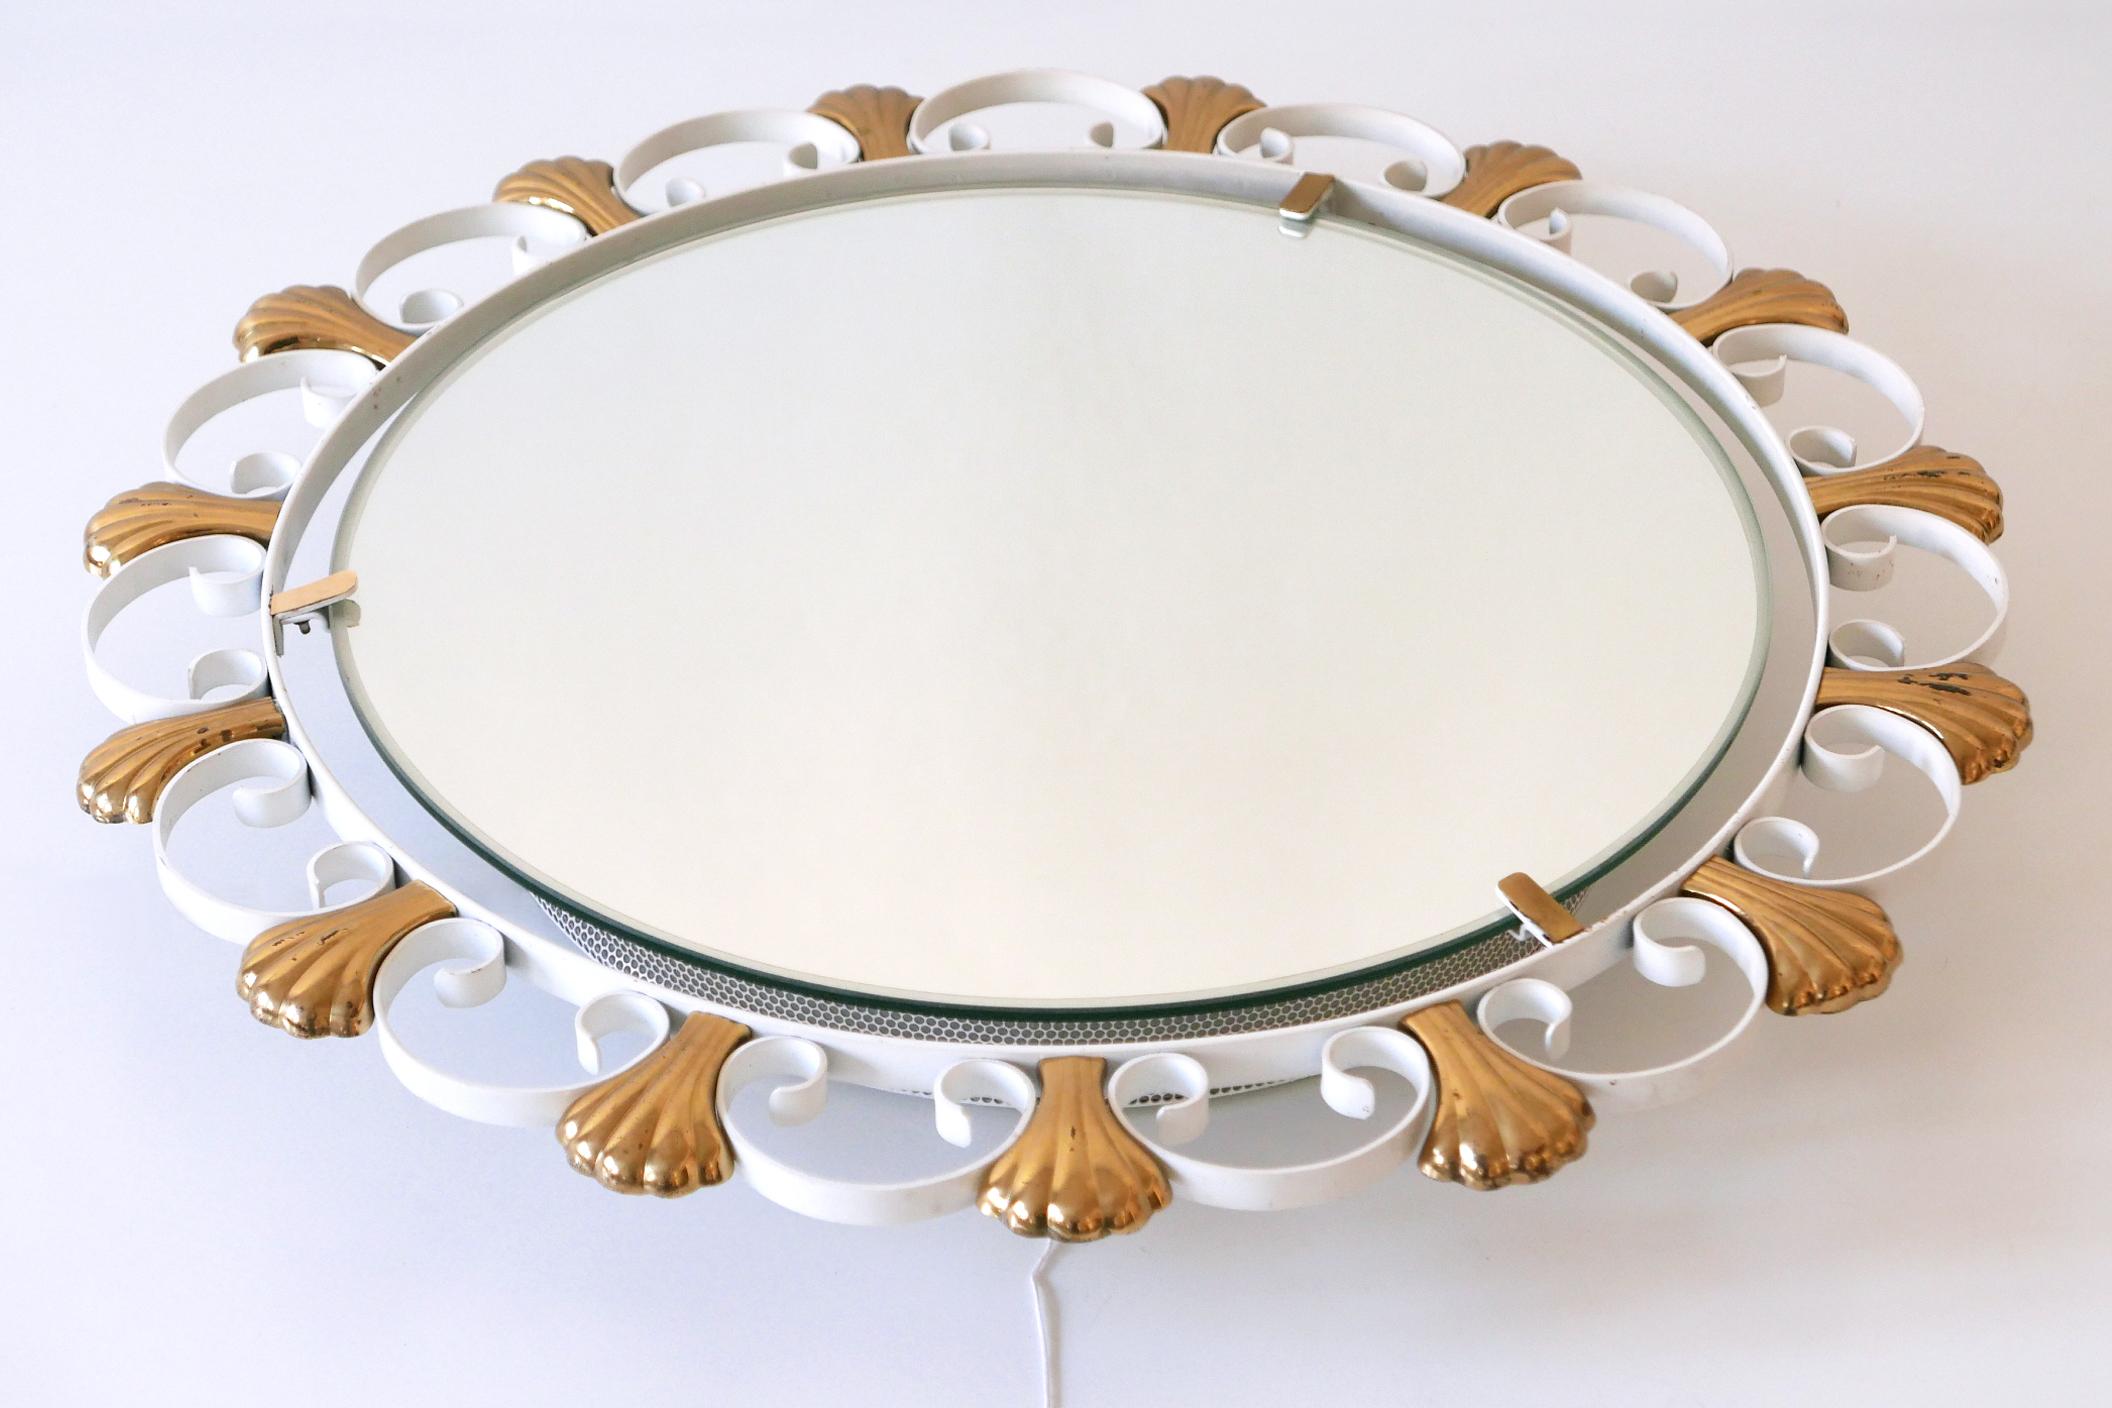 Elegant Mid-Century Modern Backlit Wall Mirror by Hillebrand, 1960s, Germany For Sale 8